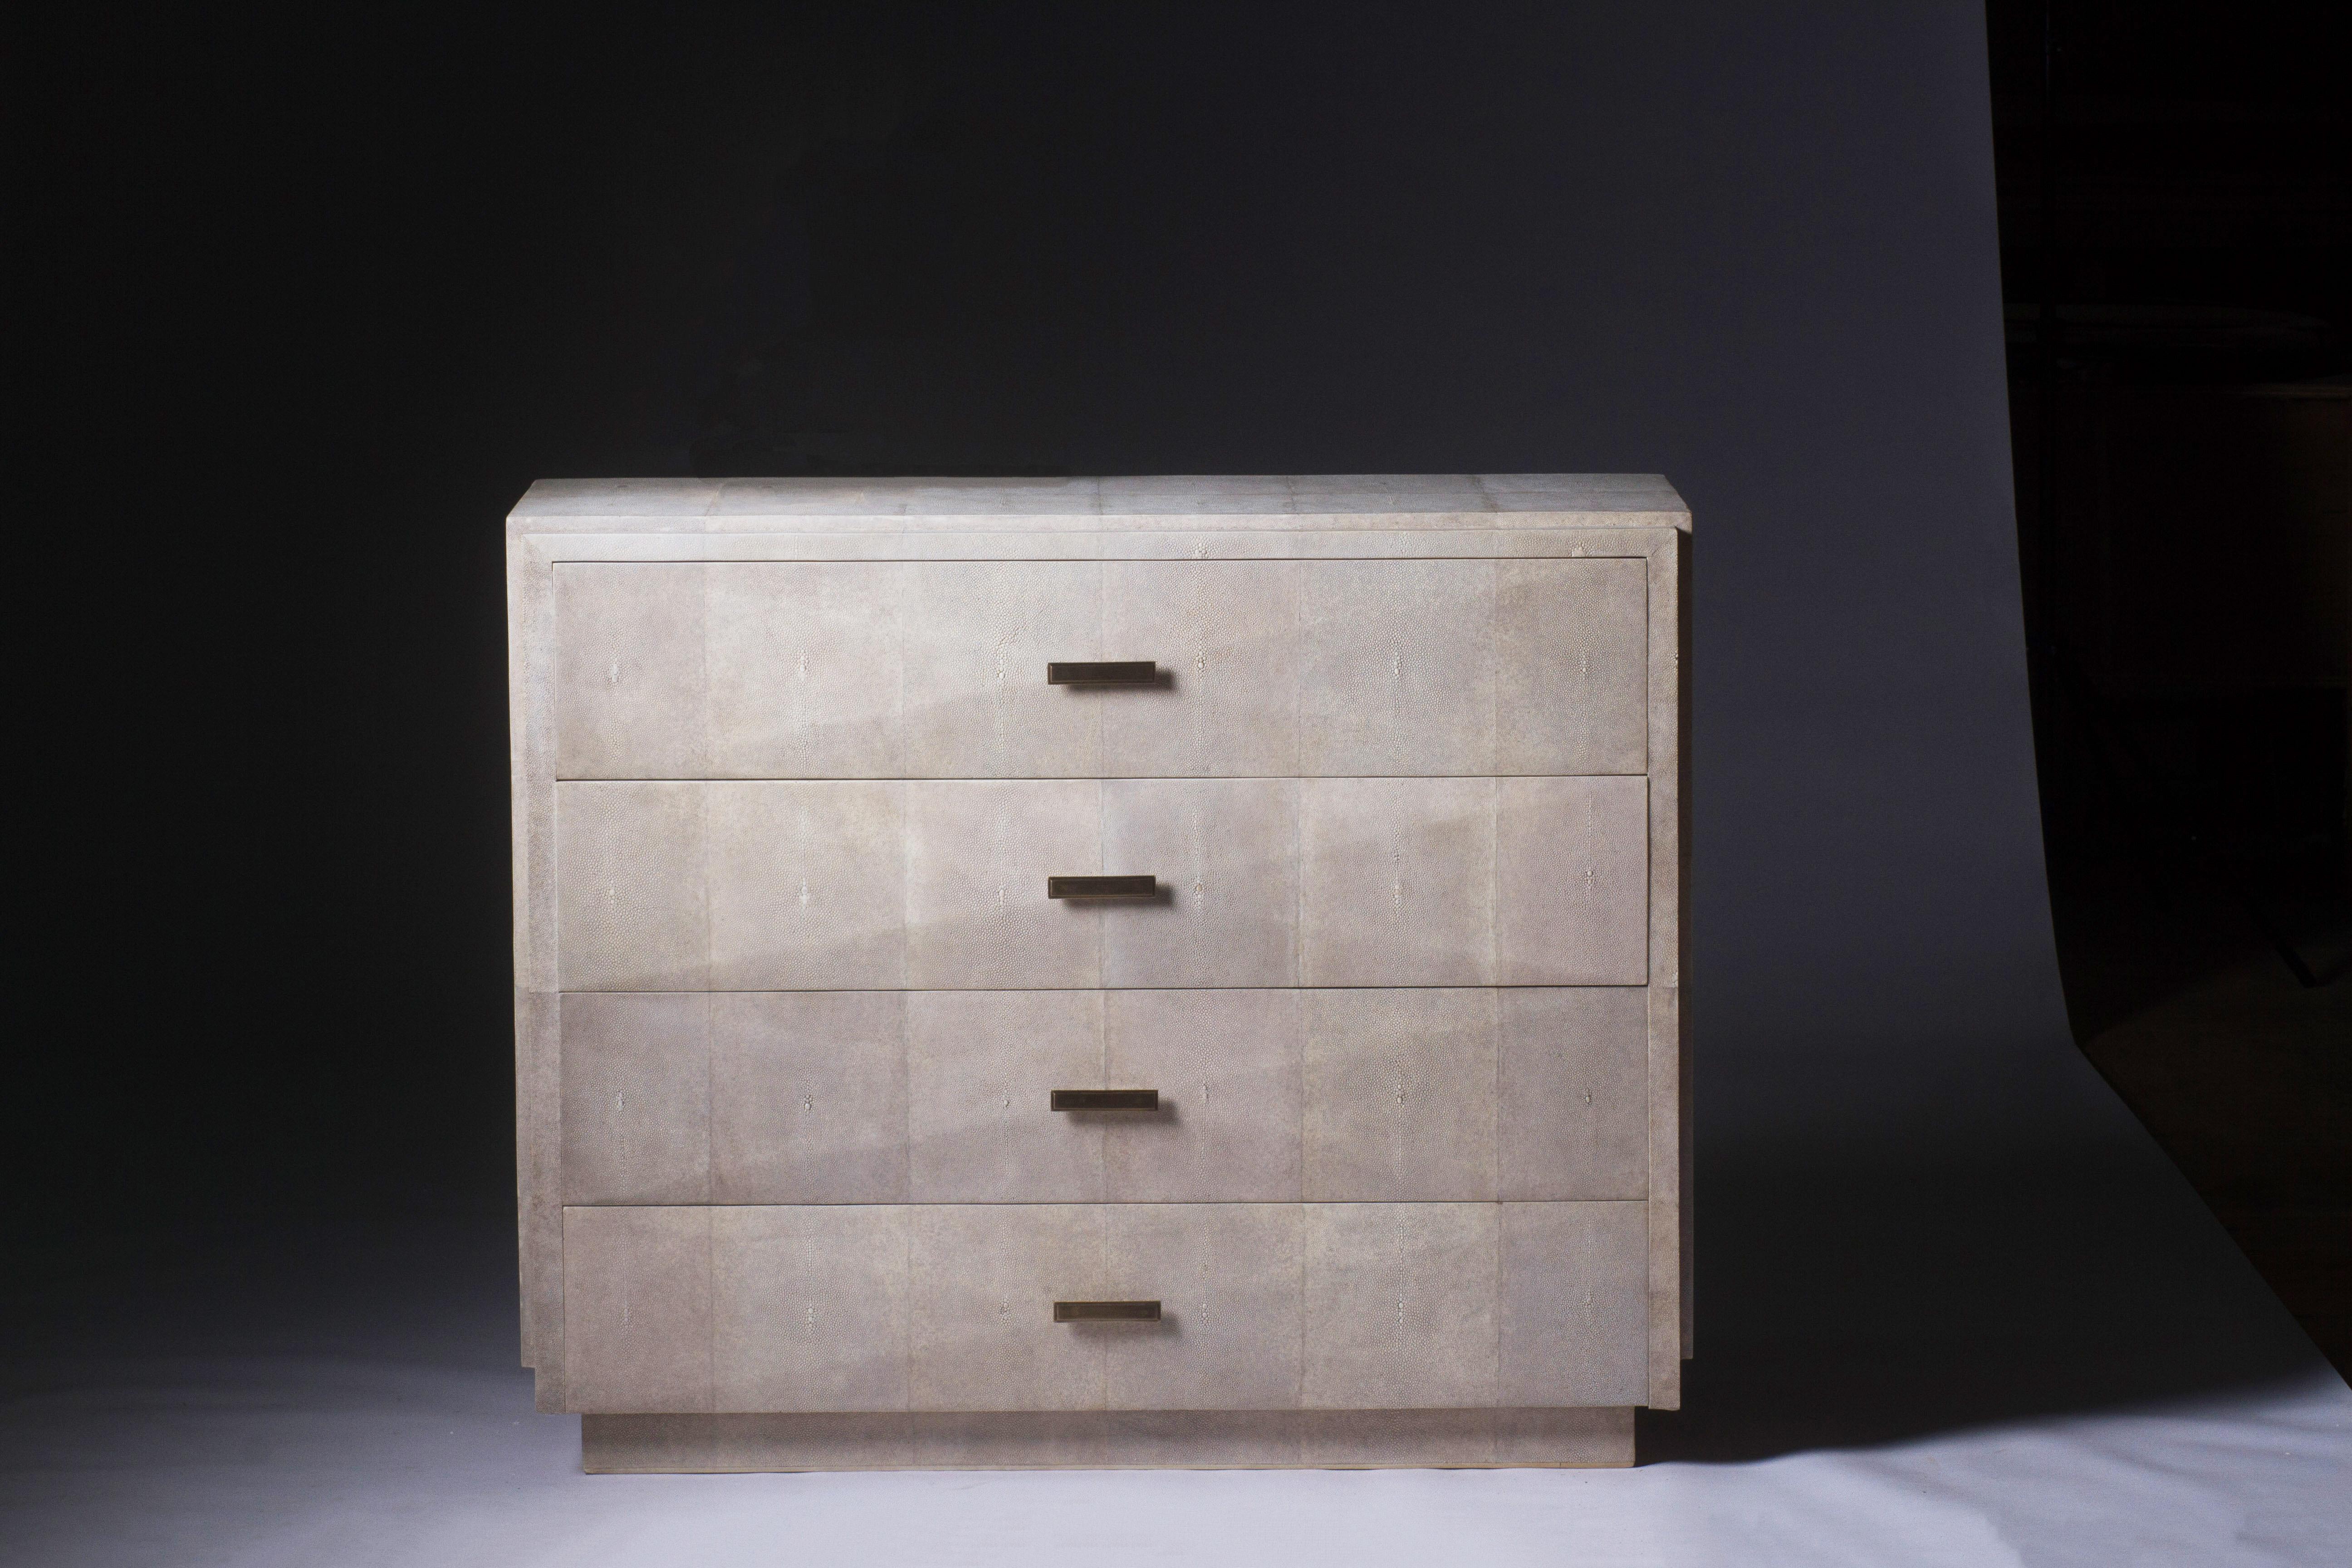 The iconic chest of drawers by R&Y Augousti is one of their first designs. A Classic and functional storage piece, with subtle geometry on the beveled drawers. This chest of drawers is completely inlaid in cream shagreen with discreet bronze-patina